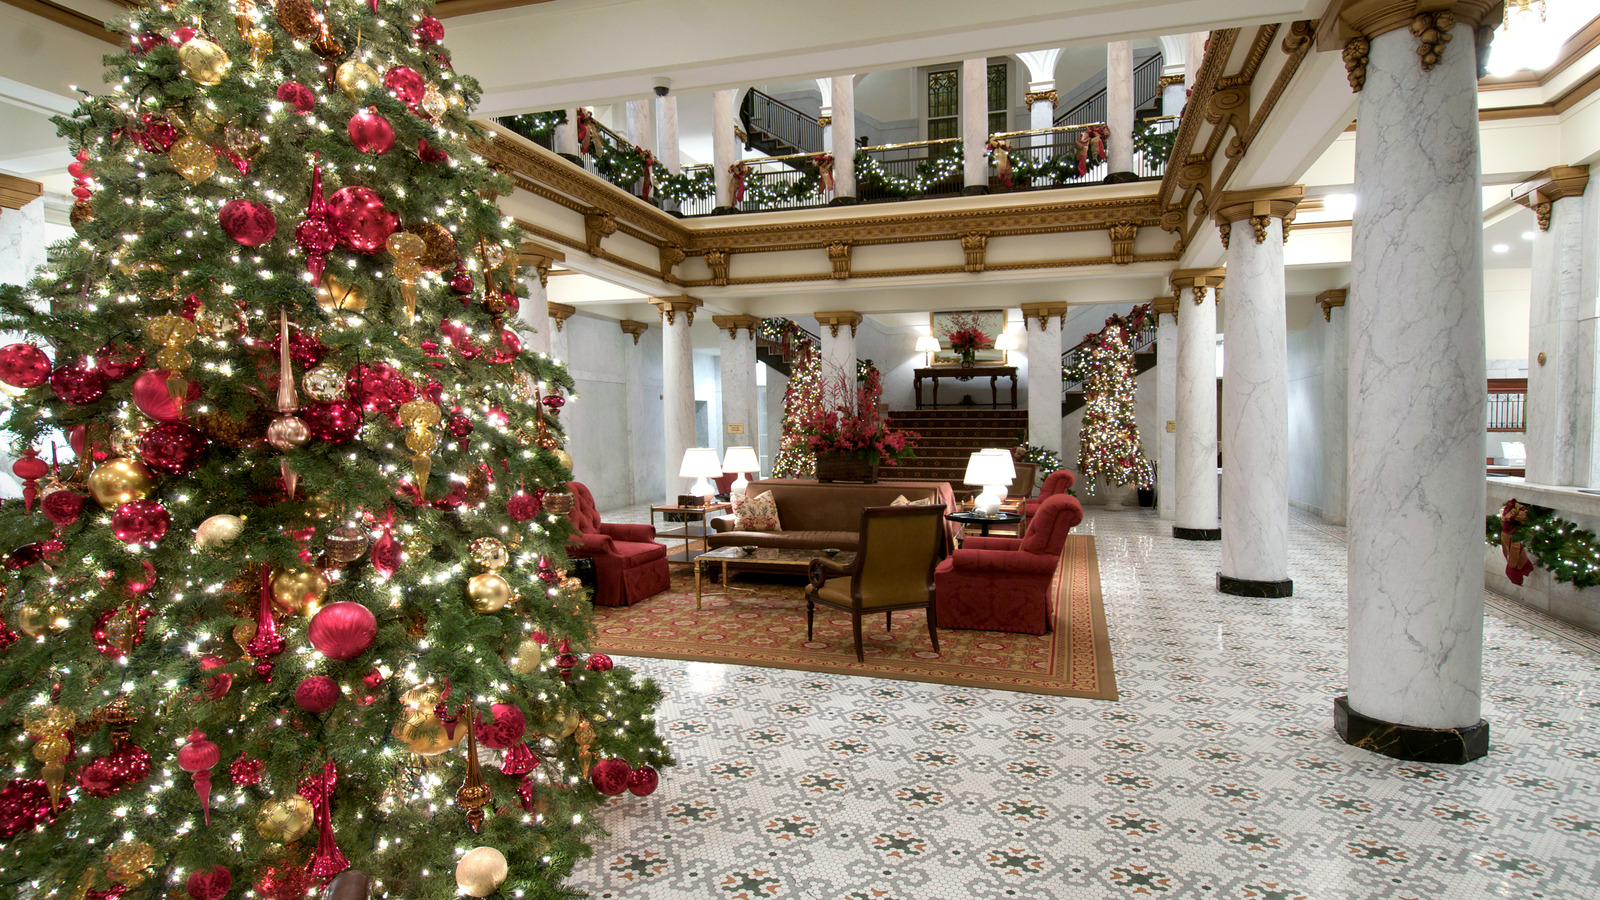 https://www.explore.com/img/gallery/christmas-themed-hotels-around-the-world-to-stay-in-this-holiday-season/l-intro-1701198665.jpg